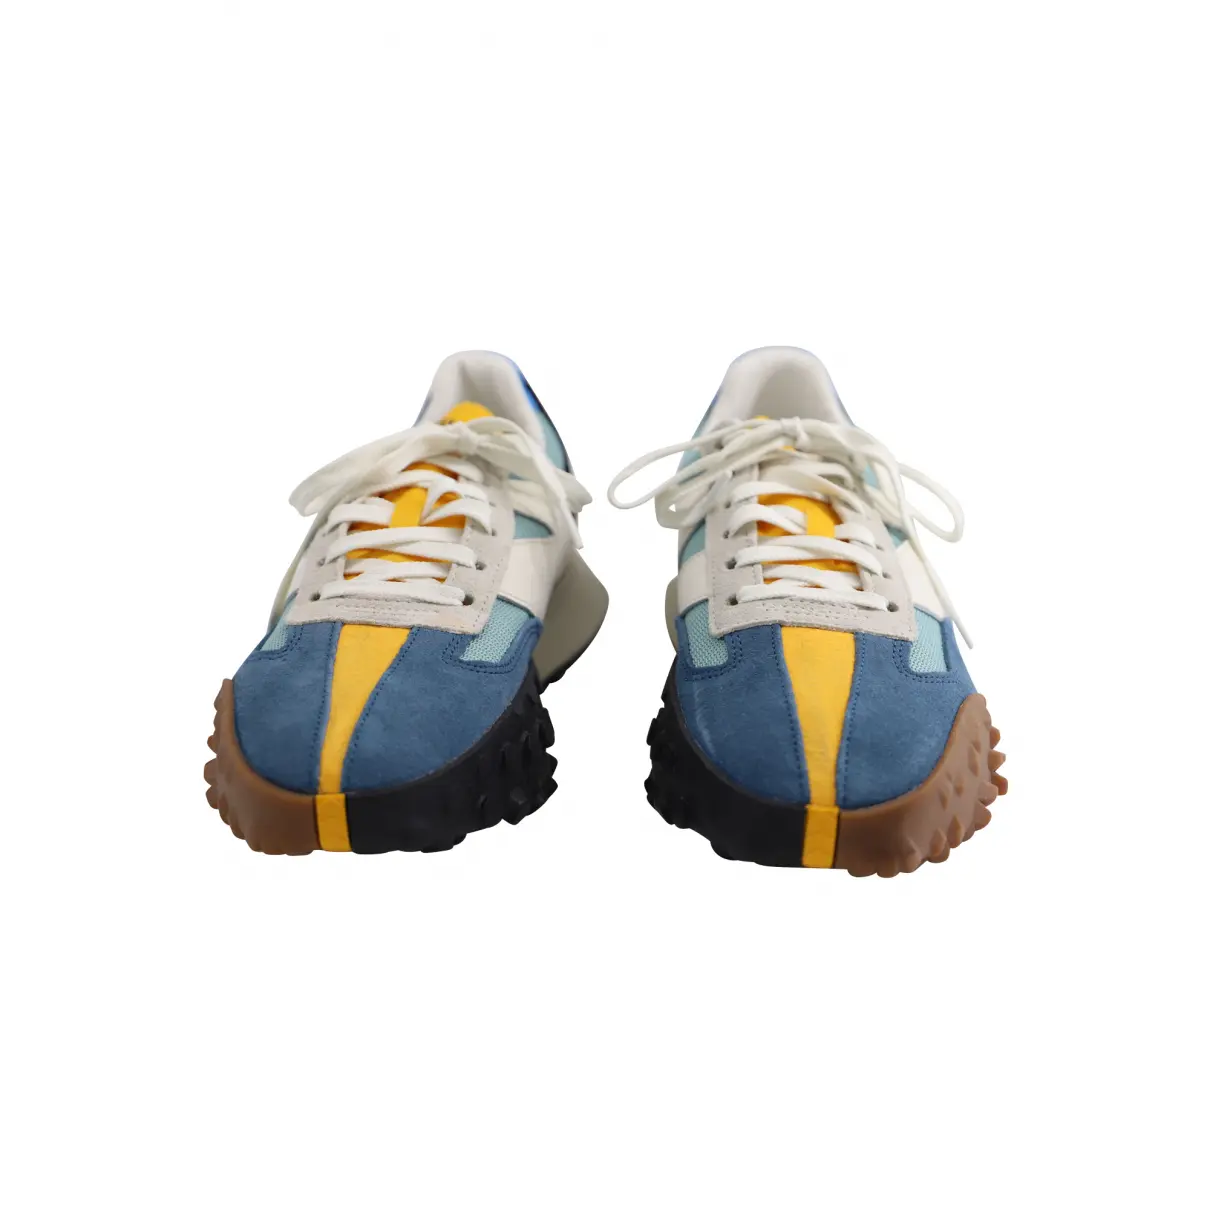 Buy New Balance Low trainers online